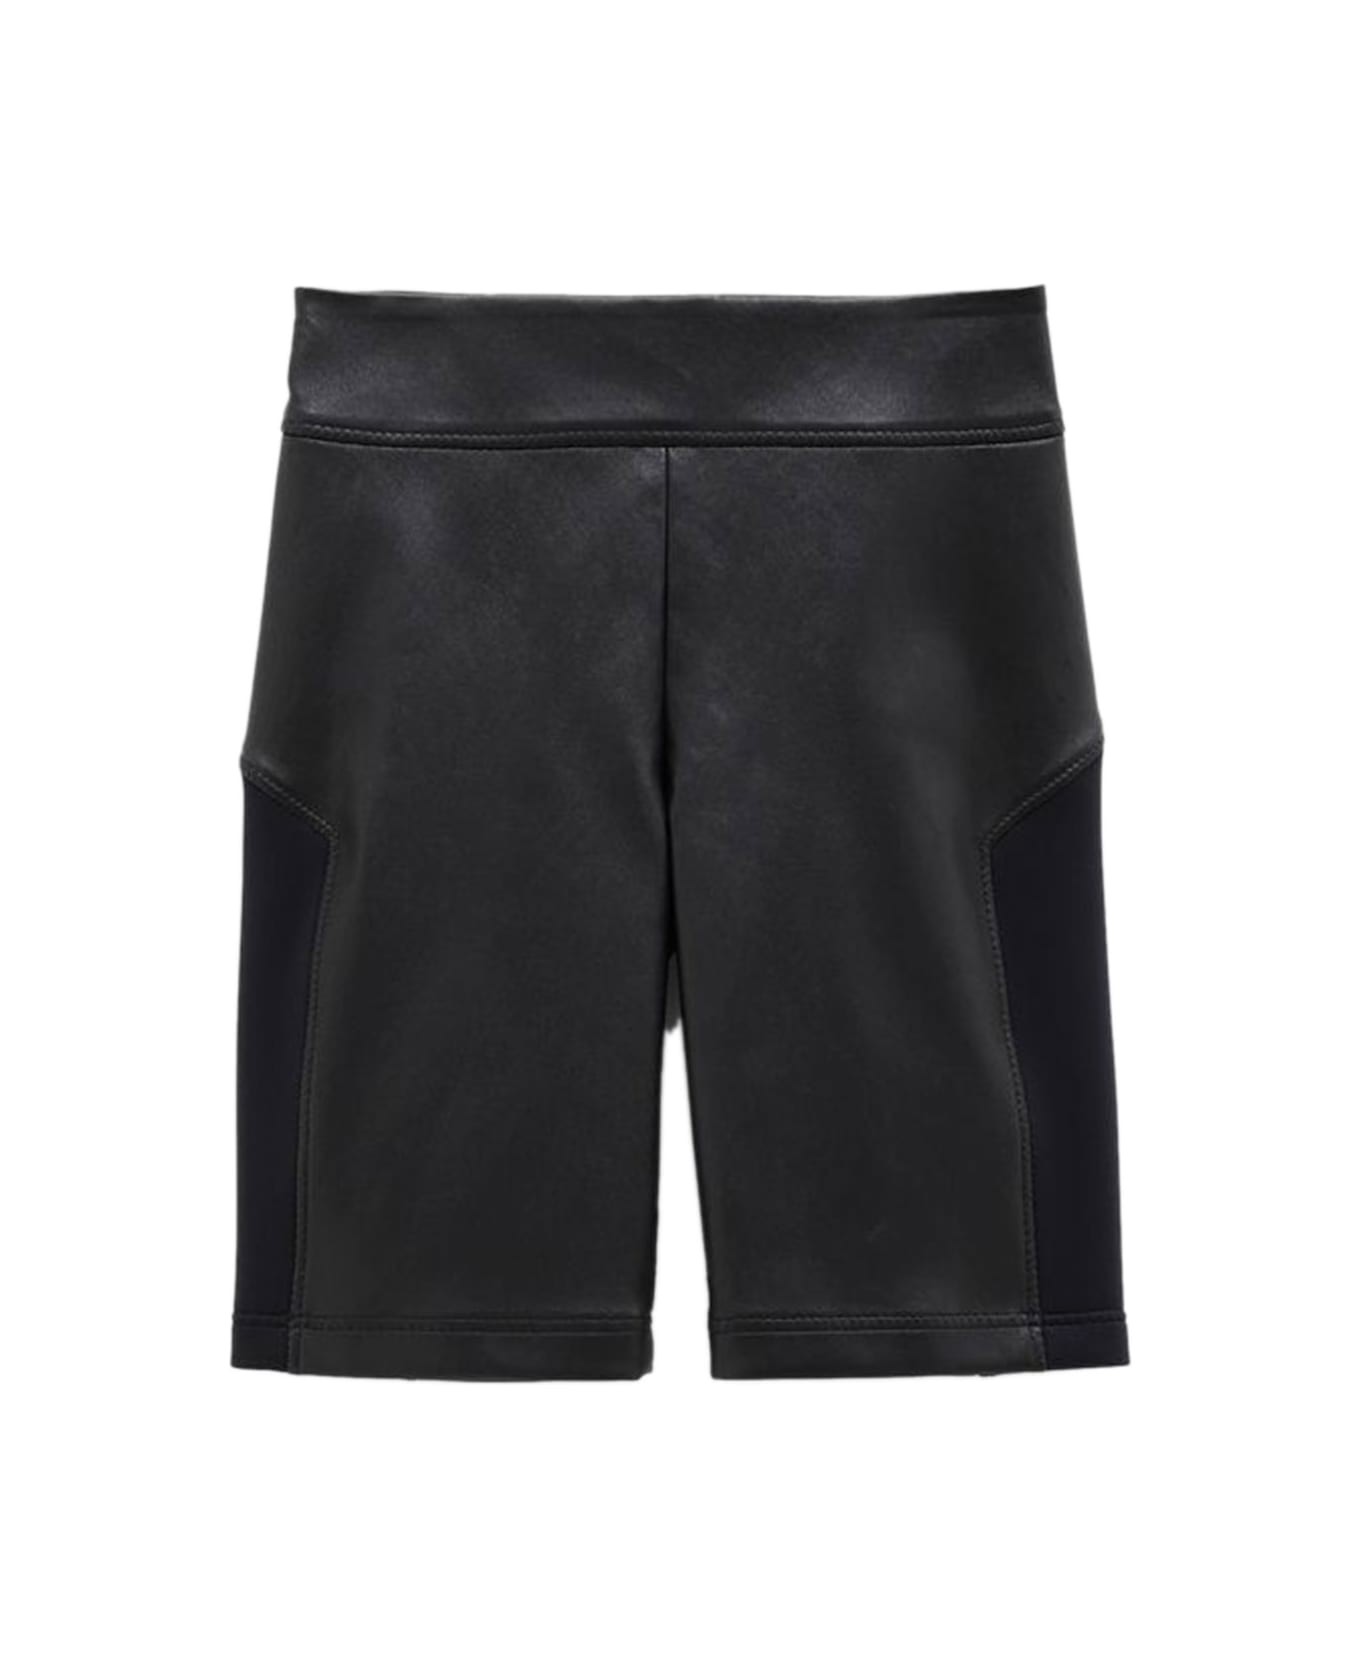 Loewe Stretch Leather And Fabric Shorts - BLACK ショートパンツ